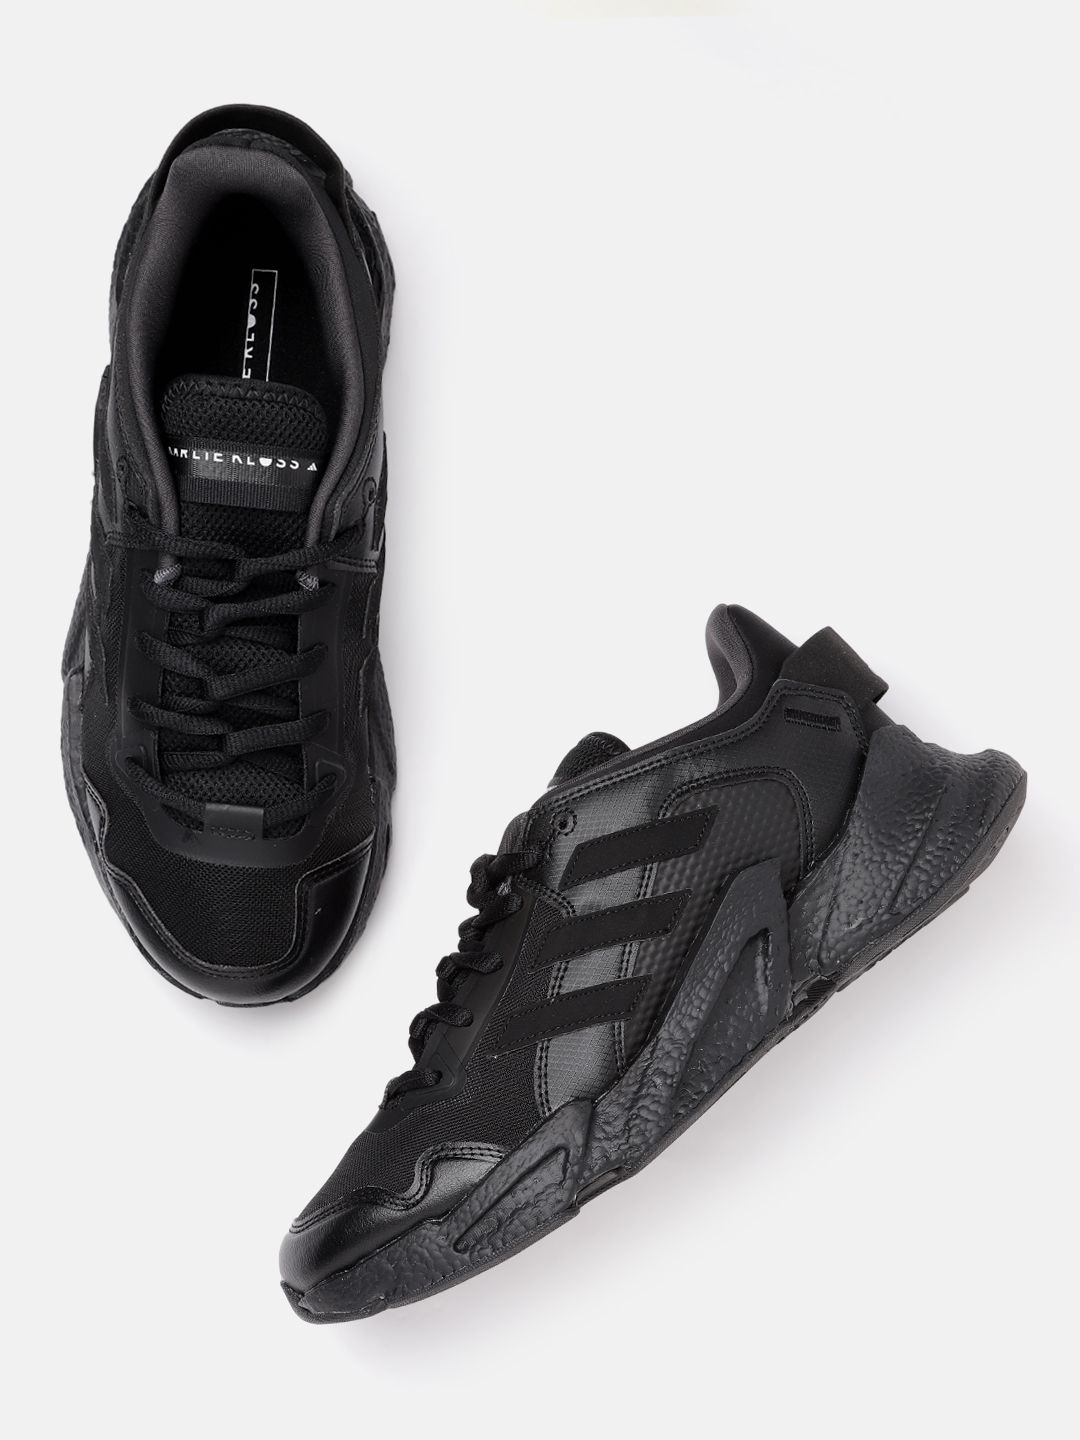 ADIDAS Women Black Solid Boost Midsole Karlie Kloss X9000 Sustainable Running Shoes Price in India